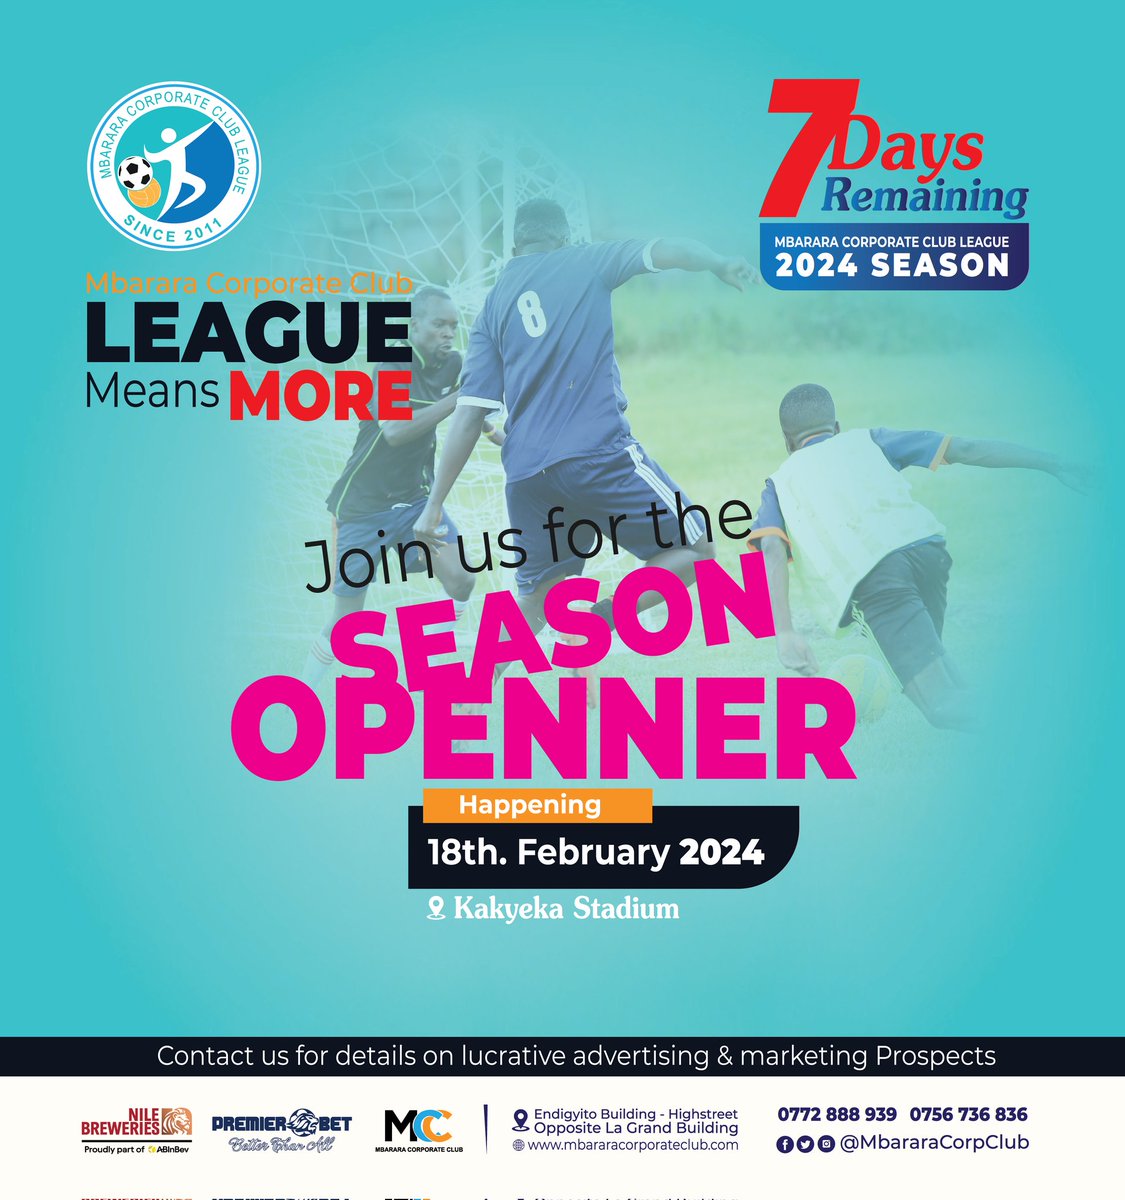 Just 7 days remaining,  Join us for the Season Openner, the 1st Out of #NBLMCCSeasob24. 
Mbarara Corporate Club League means more. See you next Sunday 18th February at Kakyeka Stadium. 
@NBLUganda @NileSpecial @CastleLiteUg @ClubPilsener